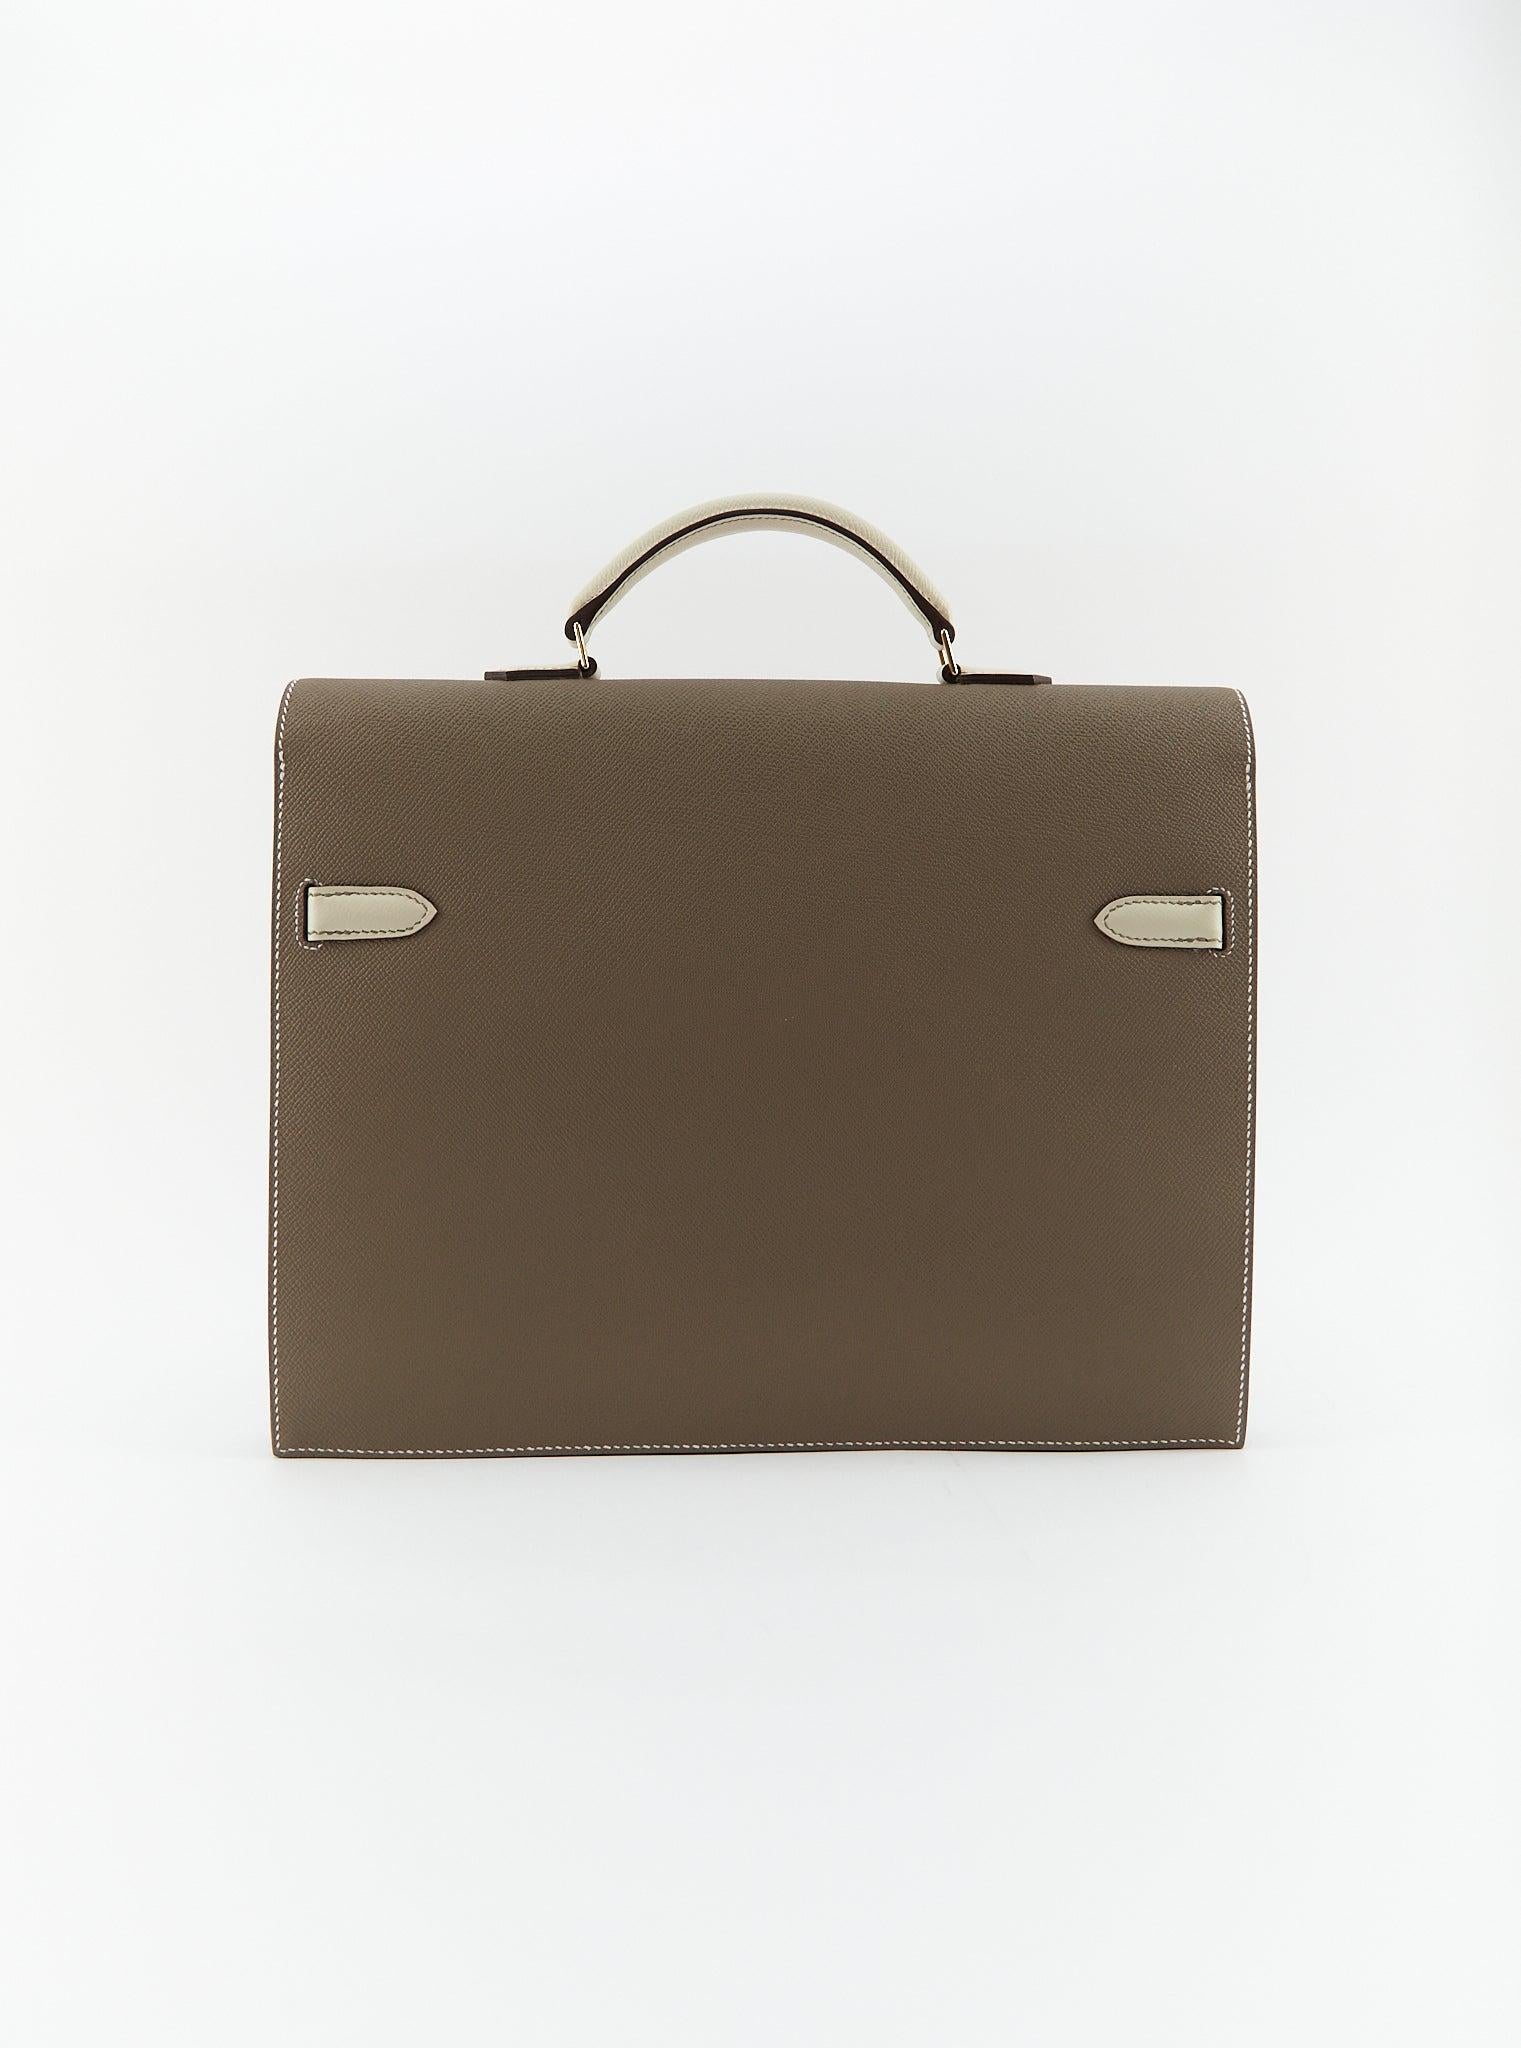 HERMÈS KELLY DEPECHES 34CM HSS SPECIAL ORDERE ETOUPE & CRAIE Epsom Leather with  For Sale 1